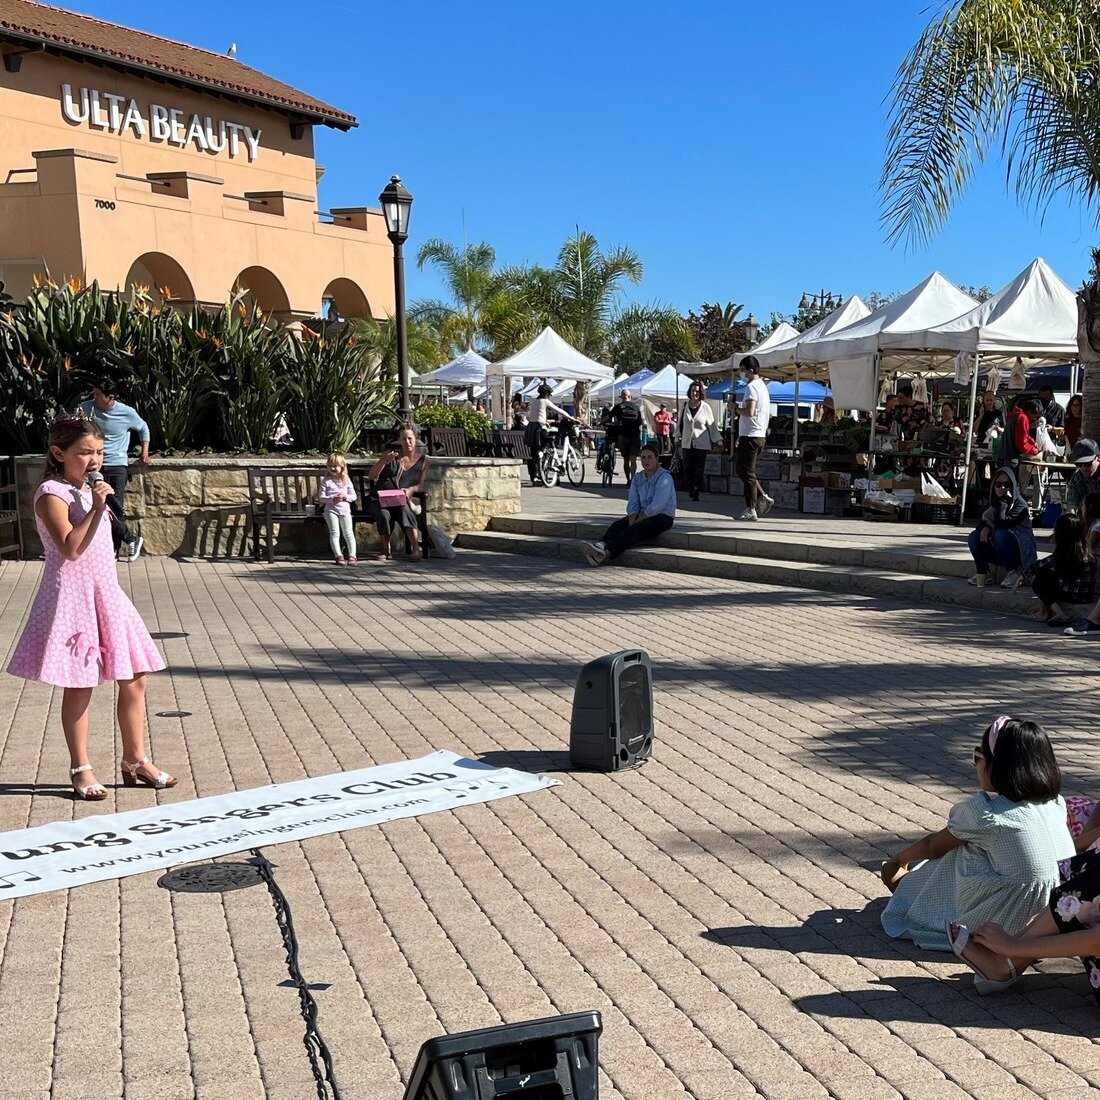 Come on down! The talented Young Singers Club will be performing in the Camino Real Marketplace food court plaza during Farmer's Market this Sunday, March 10 from 12 - 2 pm 🎤🎼🤩‼️

See our calendar of events https://www.caminorealmarketplace.net/ha